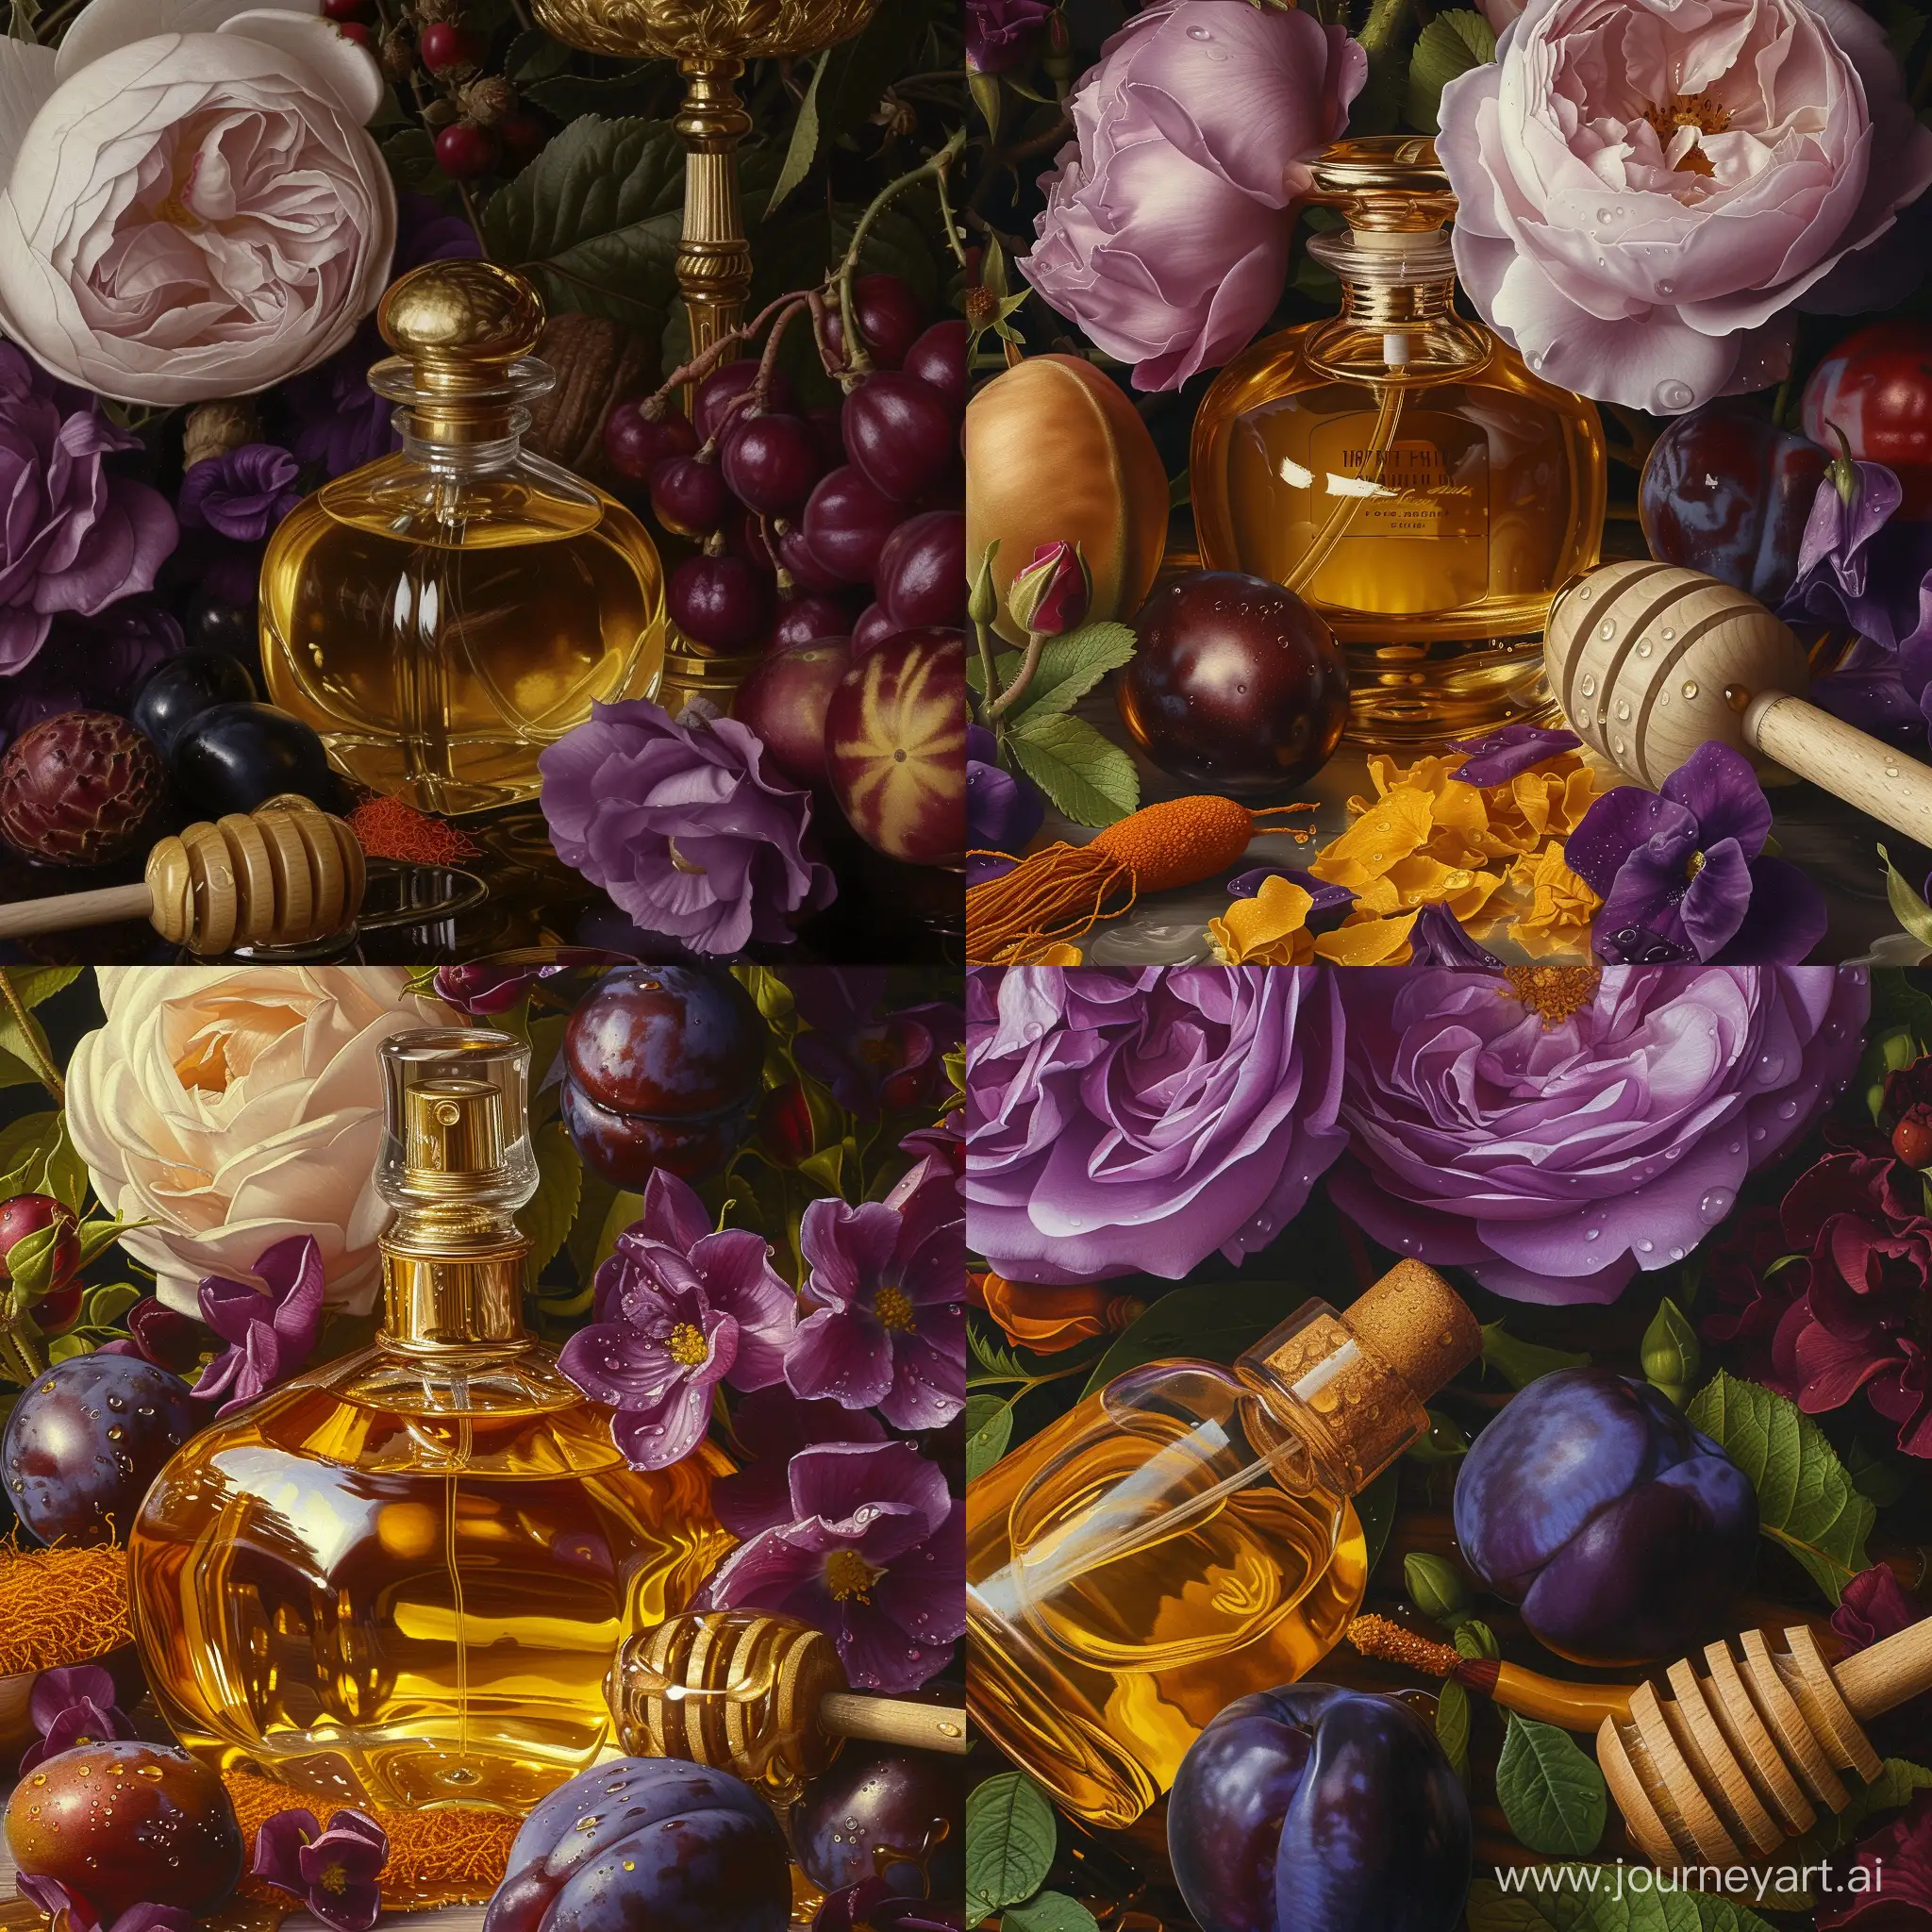 Exquisite-Perfume-Bottle-with-Saffron-Plum-Violet-and-Damask-Rose-Accents